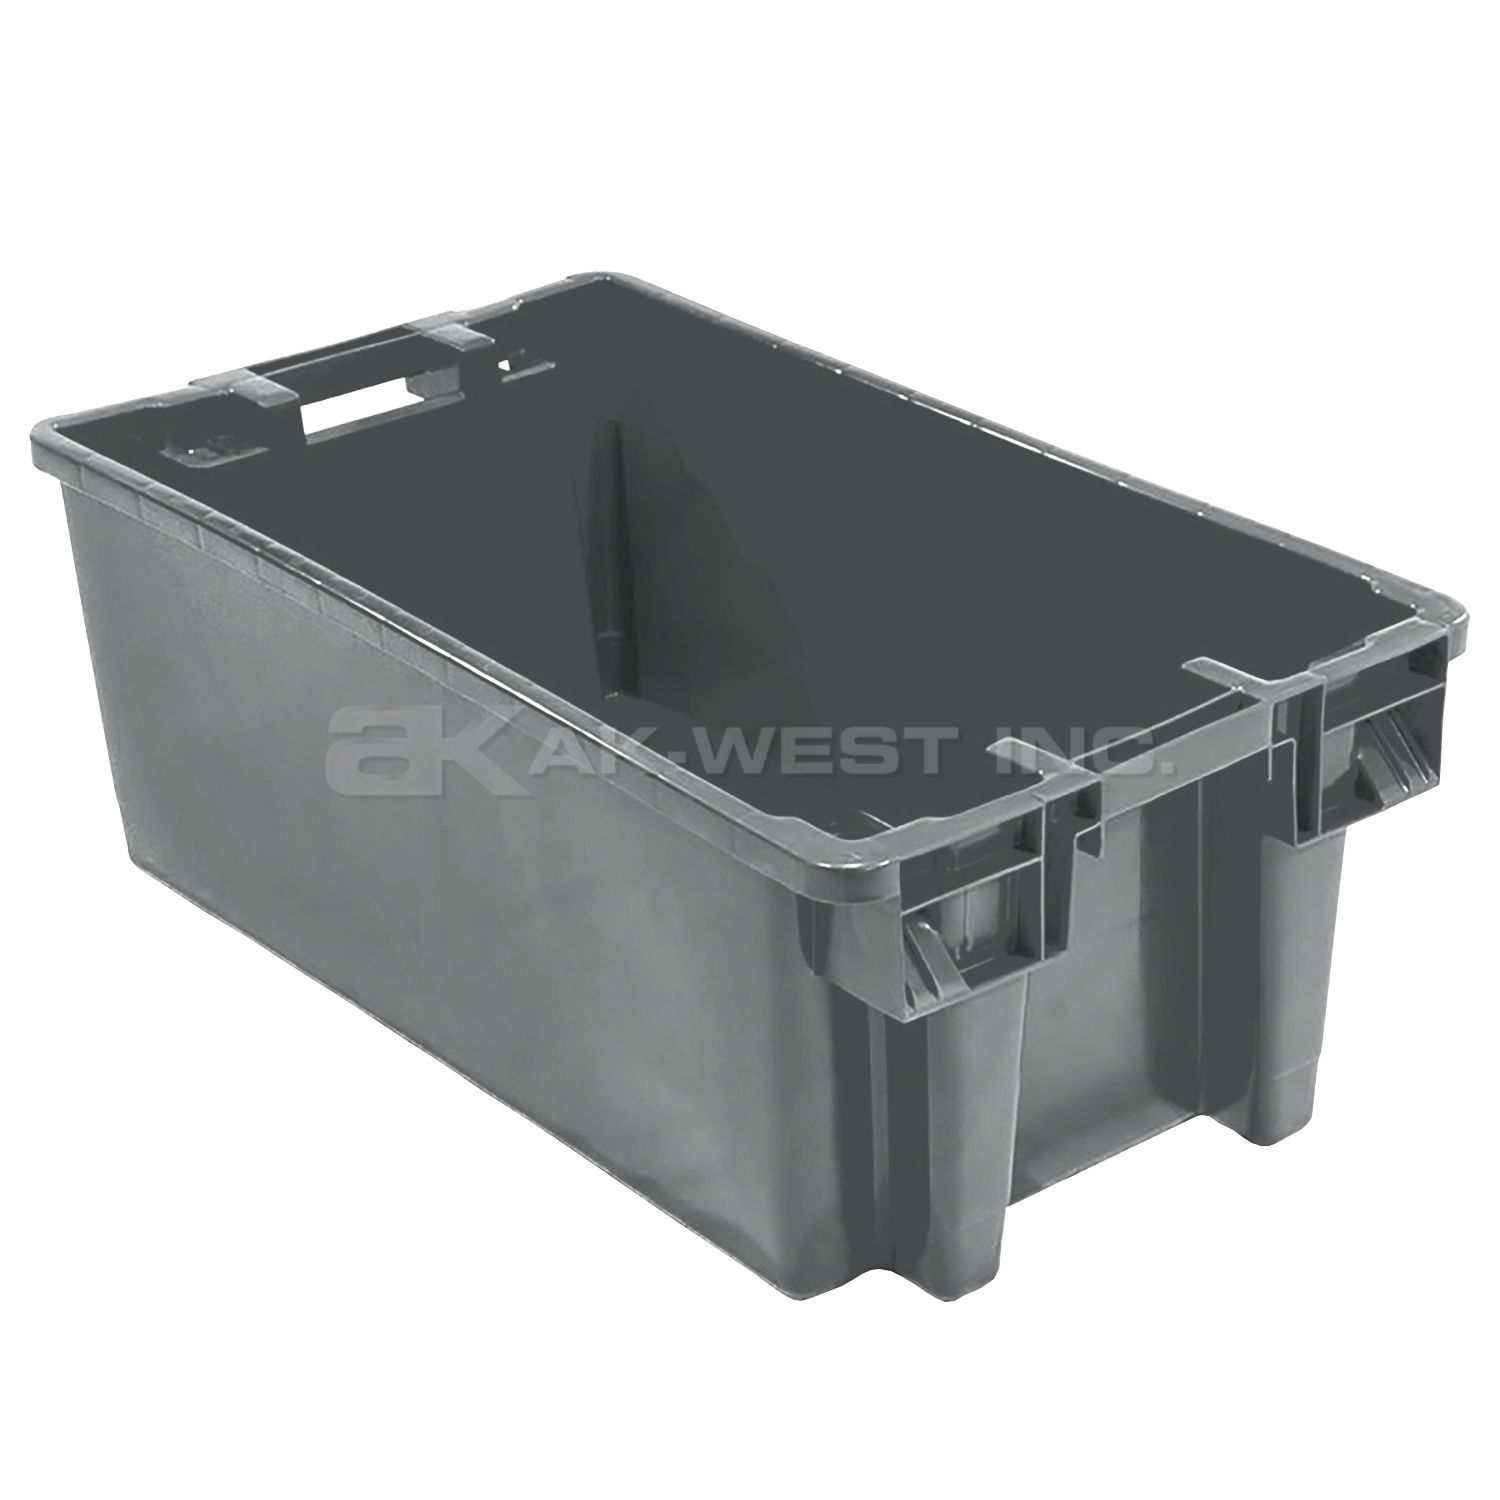 Grey, 31" x 18" x 12", Heavy Duty Stack and Nest Container